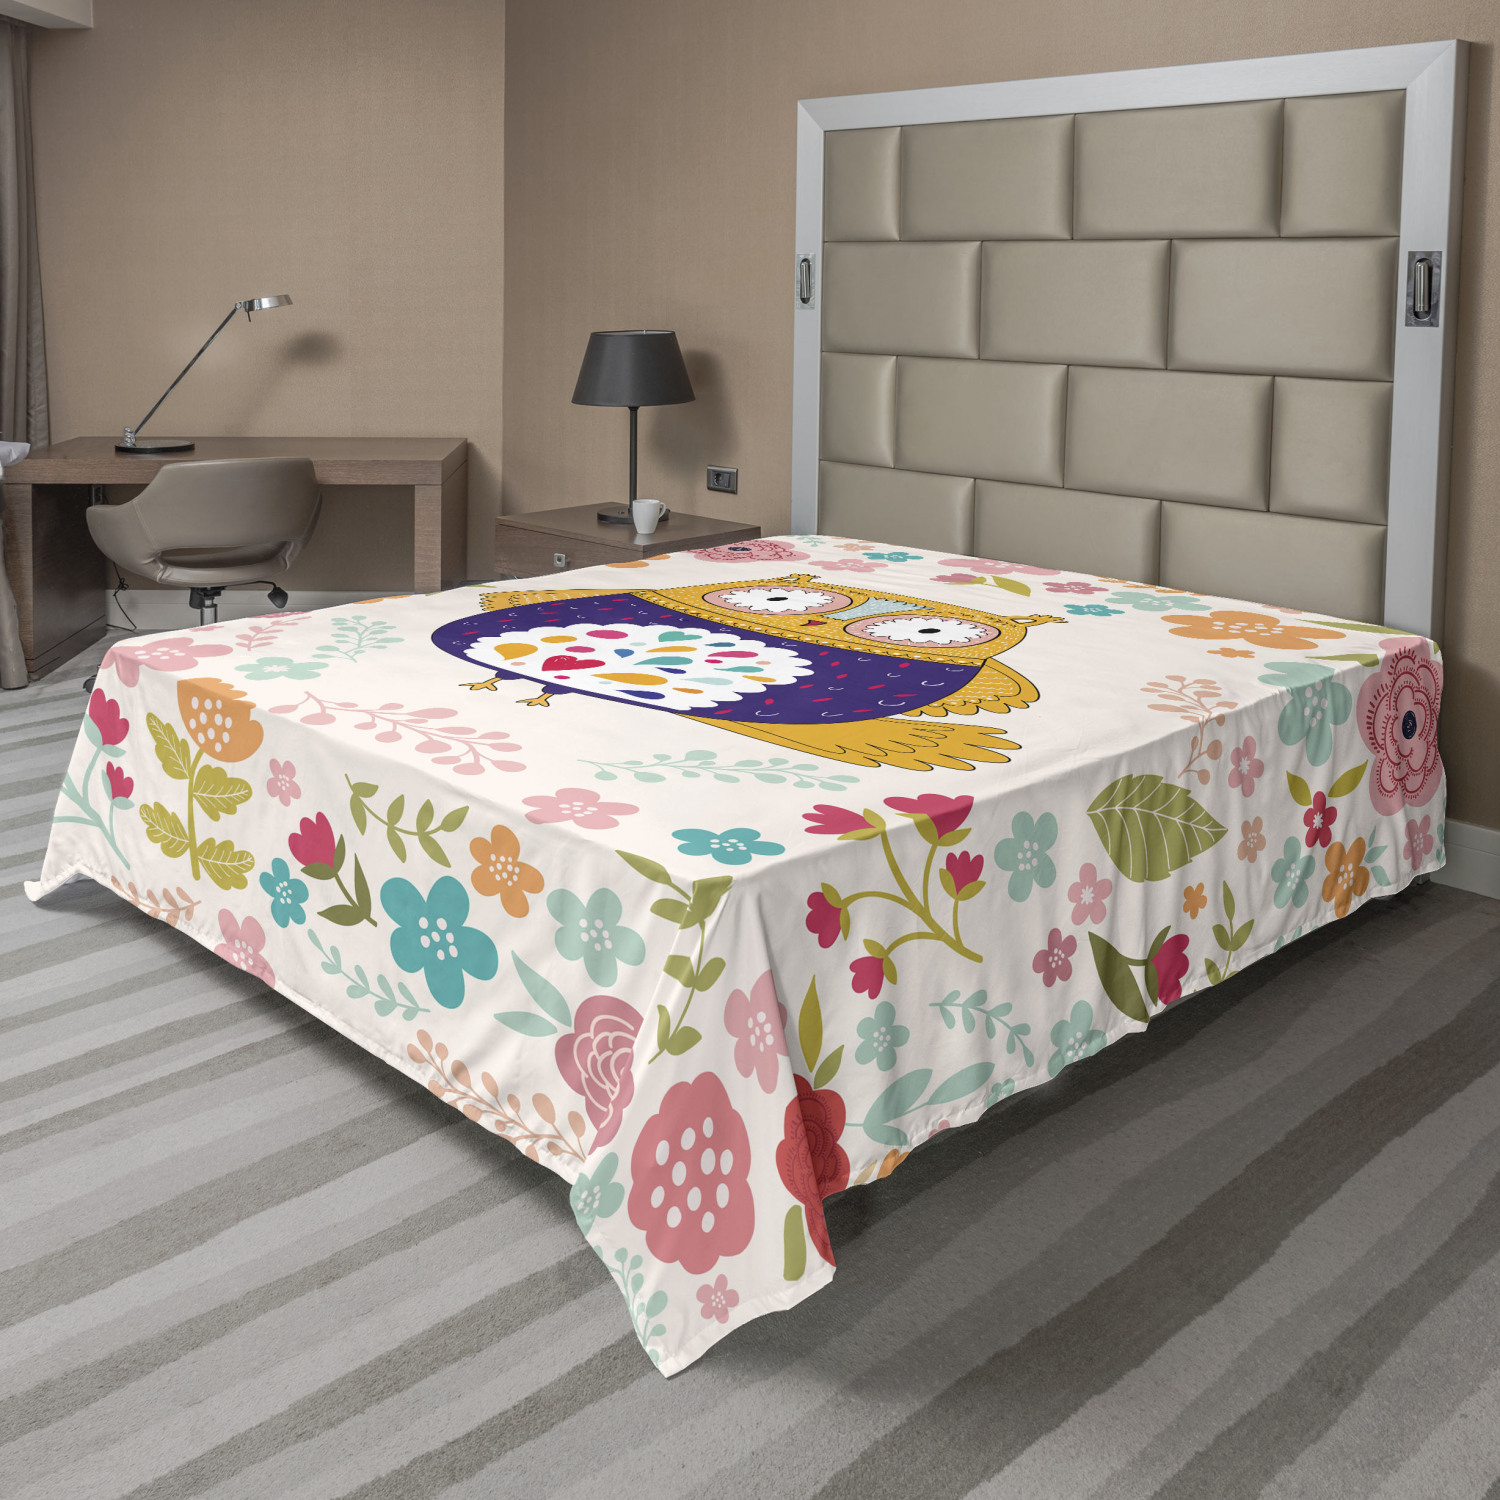 Details about   Ambesonne Owl Flat Sheet Top Sheet Decorative Bedding 6 Sizes 